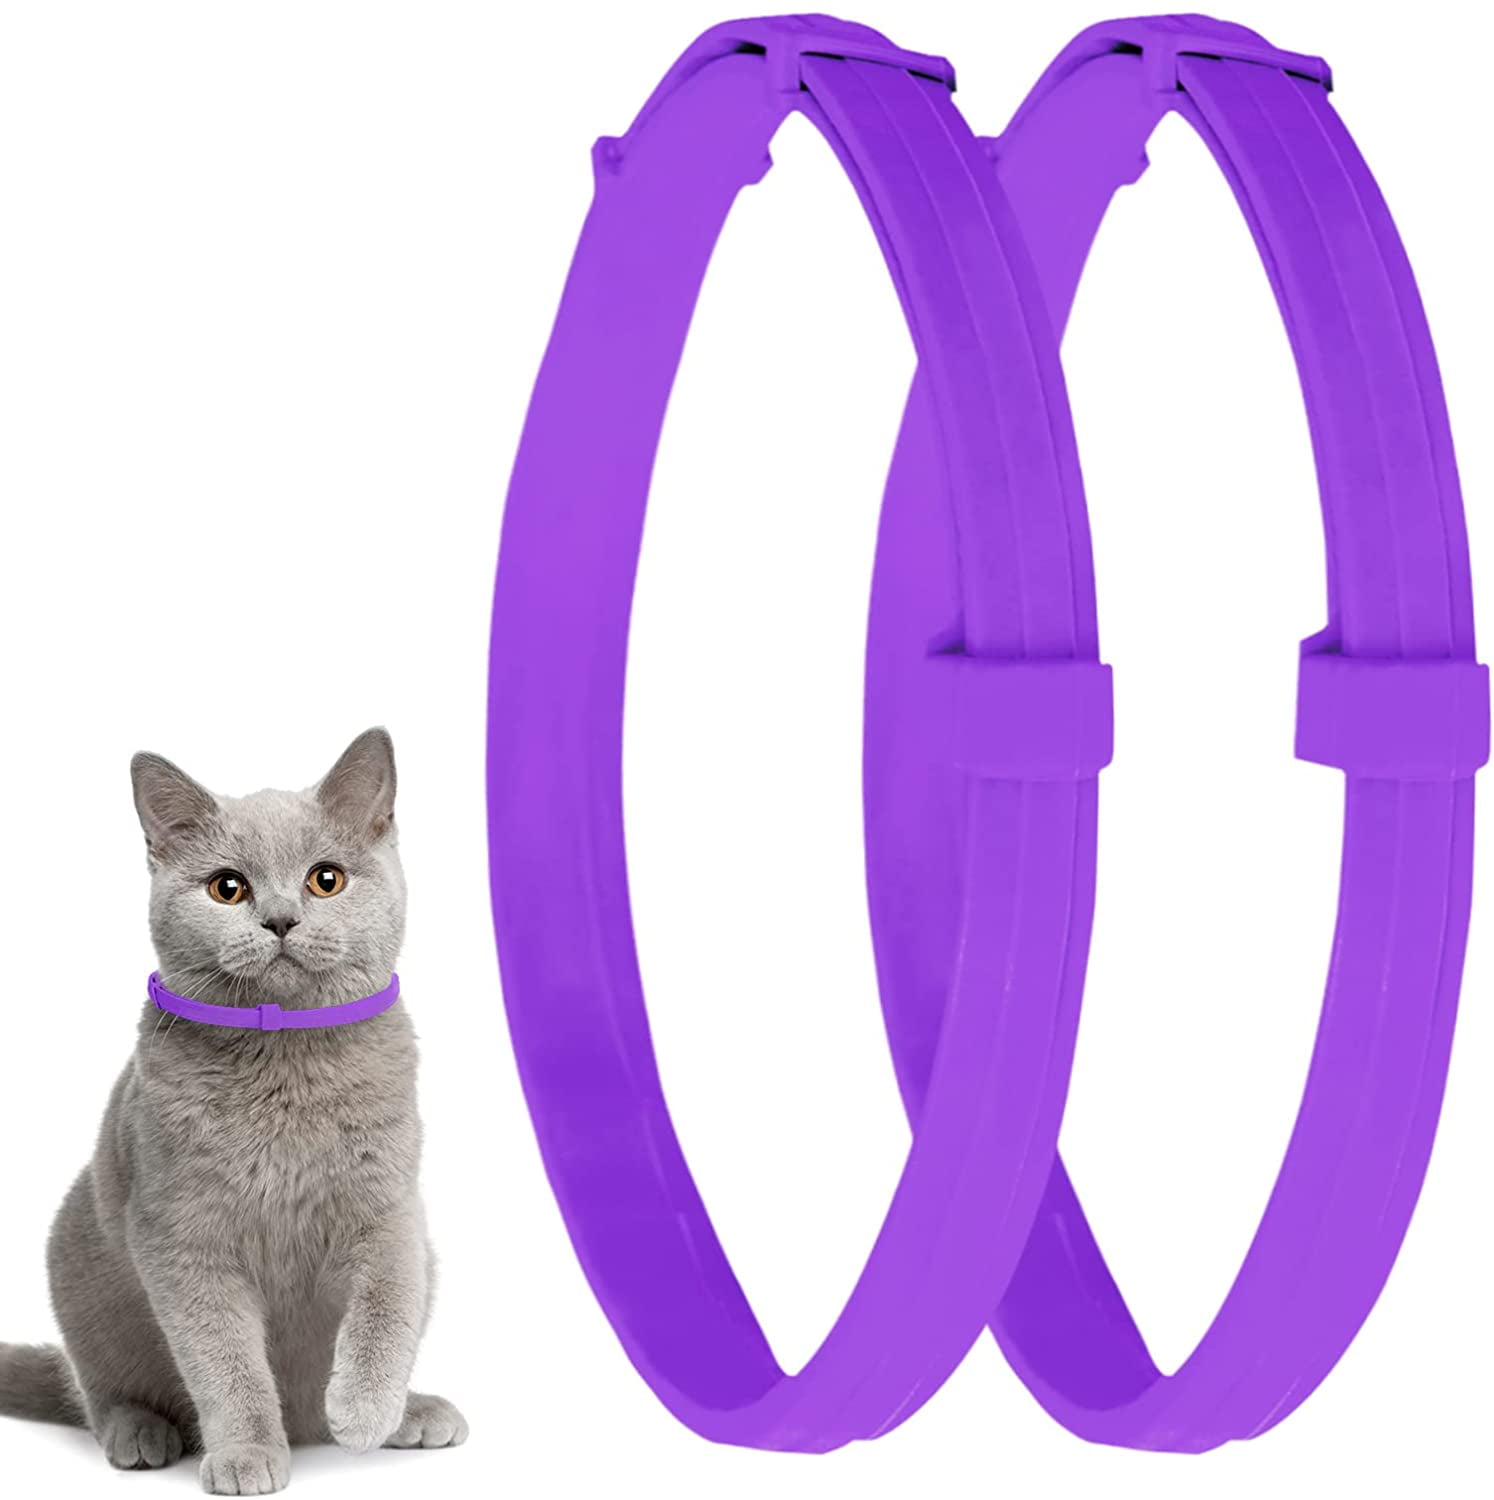 Misona Cat Collar for 8-Month Validity Period Adjustable Collars for Cat Kitten Collar Fits All Cats Pet Supplies